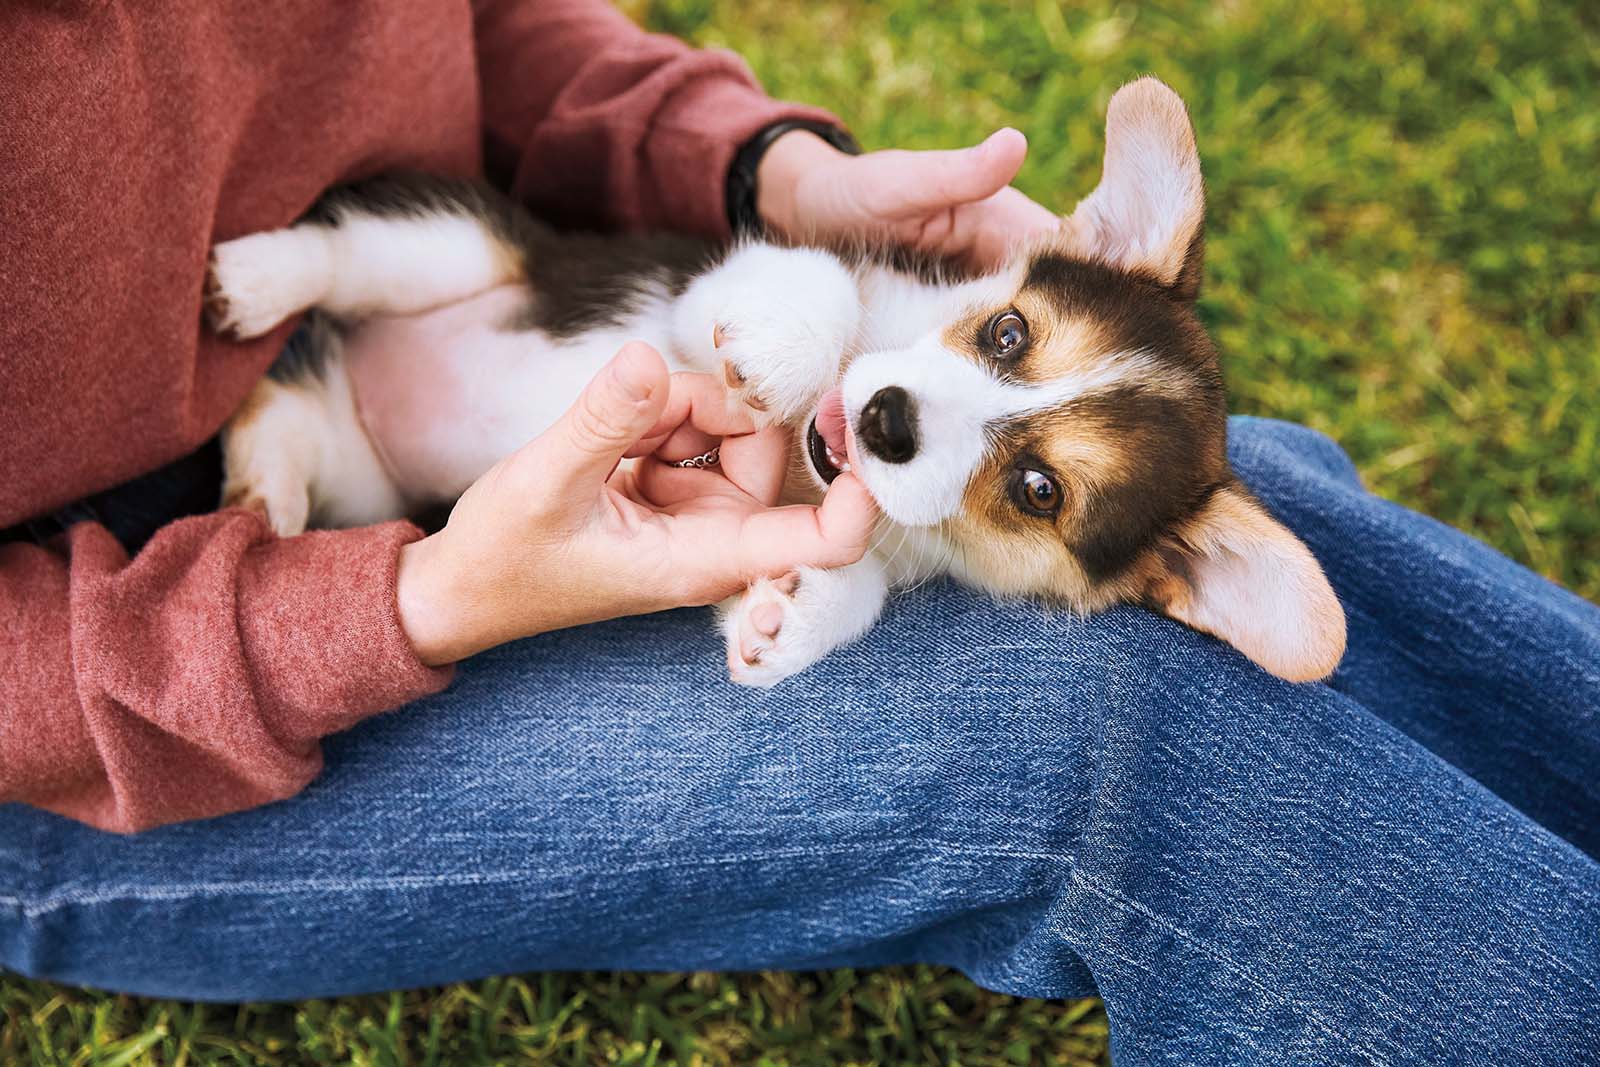 A person sits on the grass with a small corgi puppy lying on their lap. The puppy, with its brown, white, and black fur, is playfully nibbling on the person’s fingers while lying on its back, showing its belly. The person is wearing blue jeans and a red shirt.